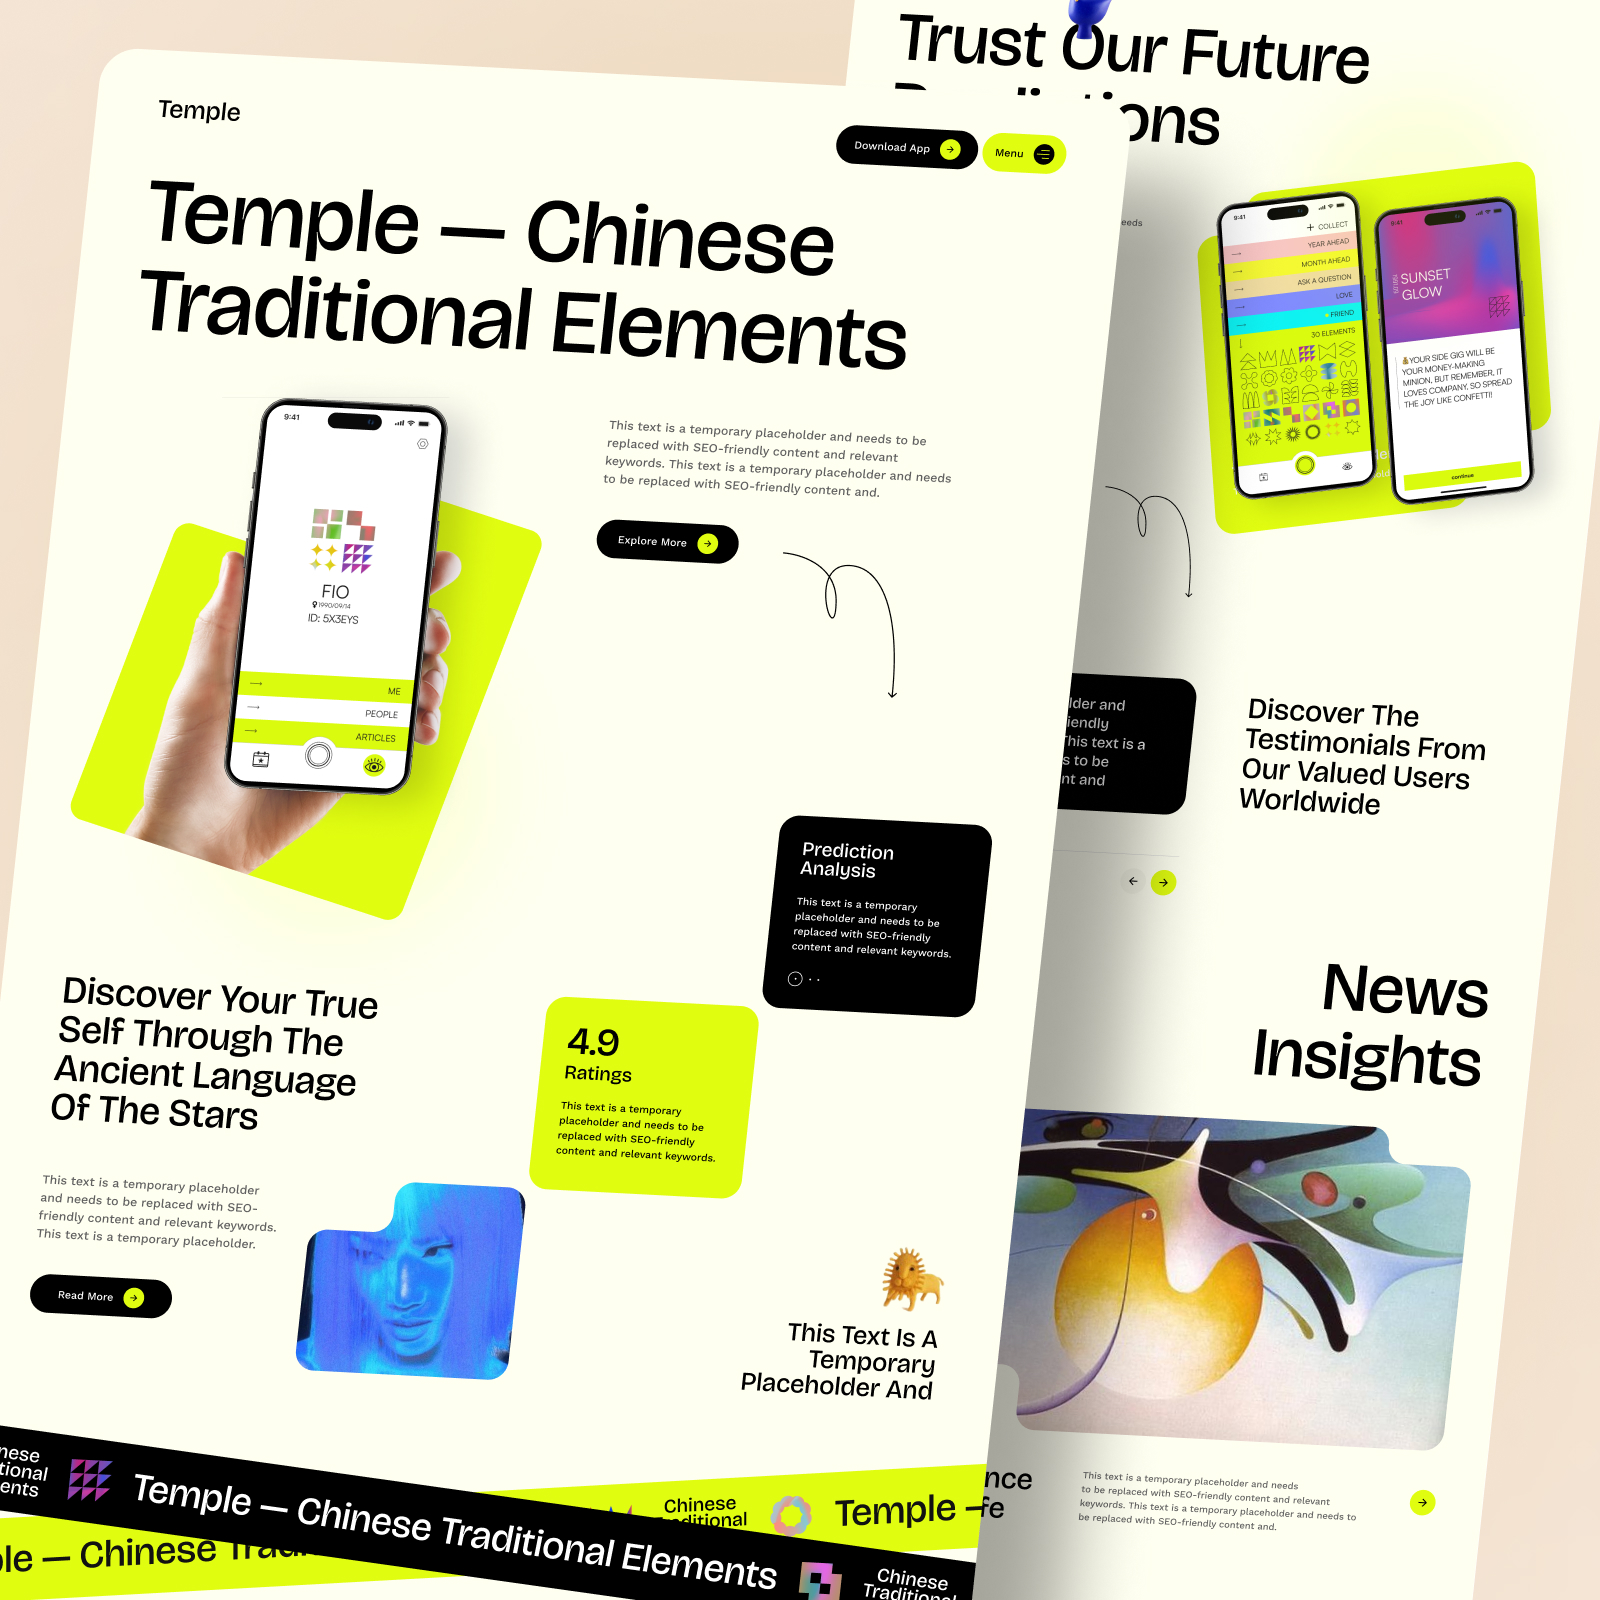 Temple — Chinese Traditional Elements